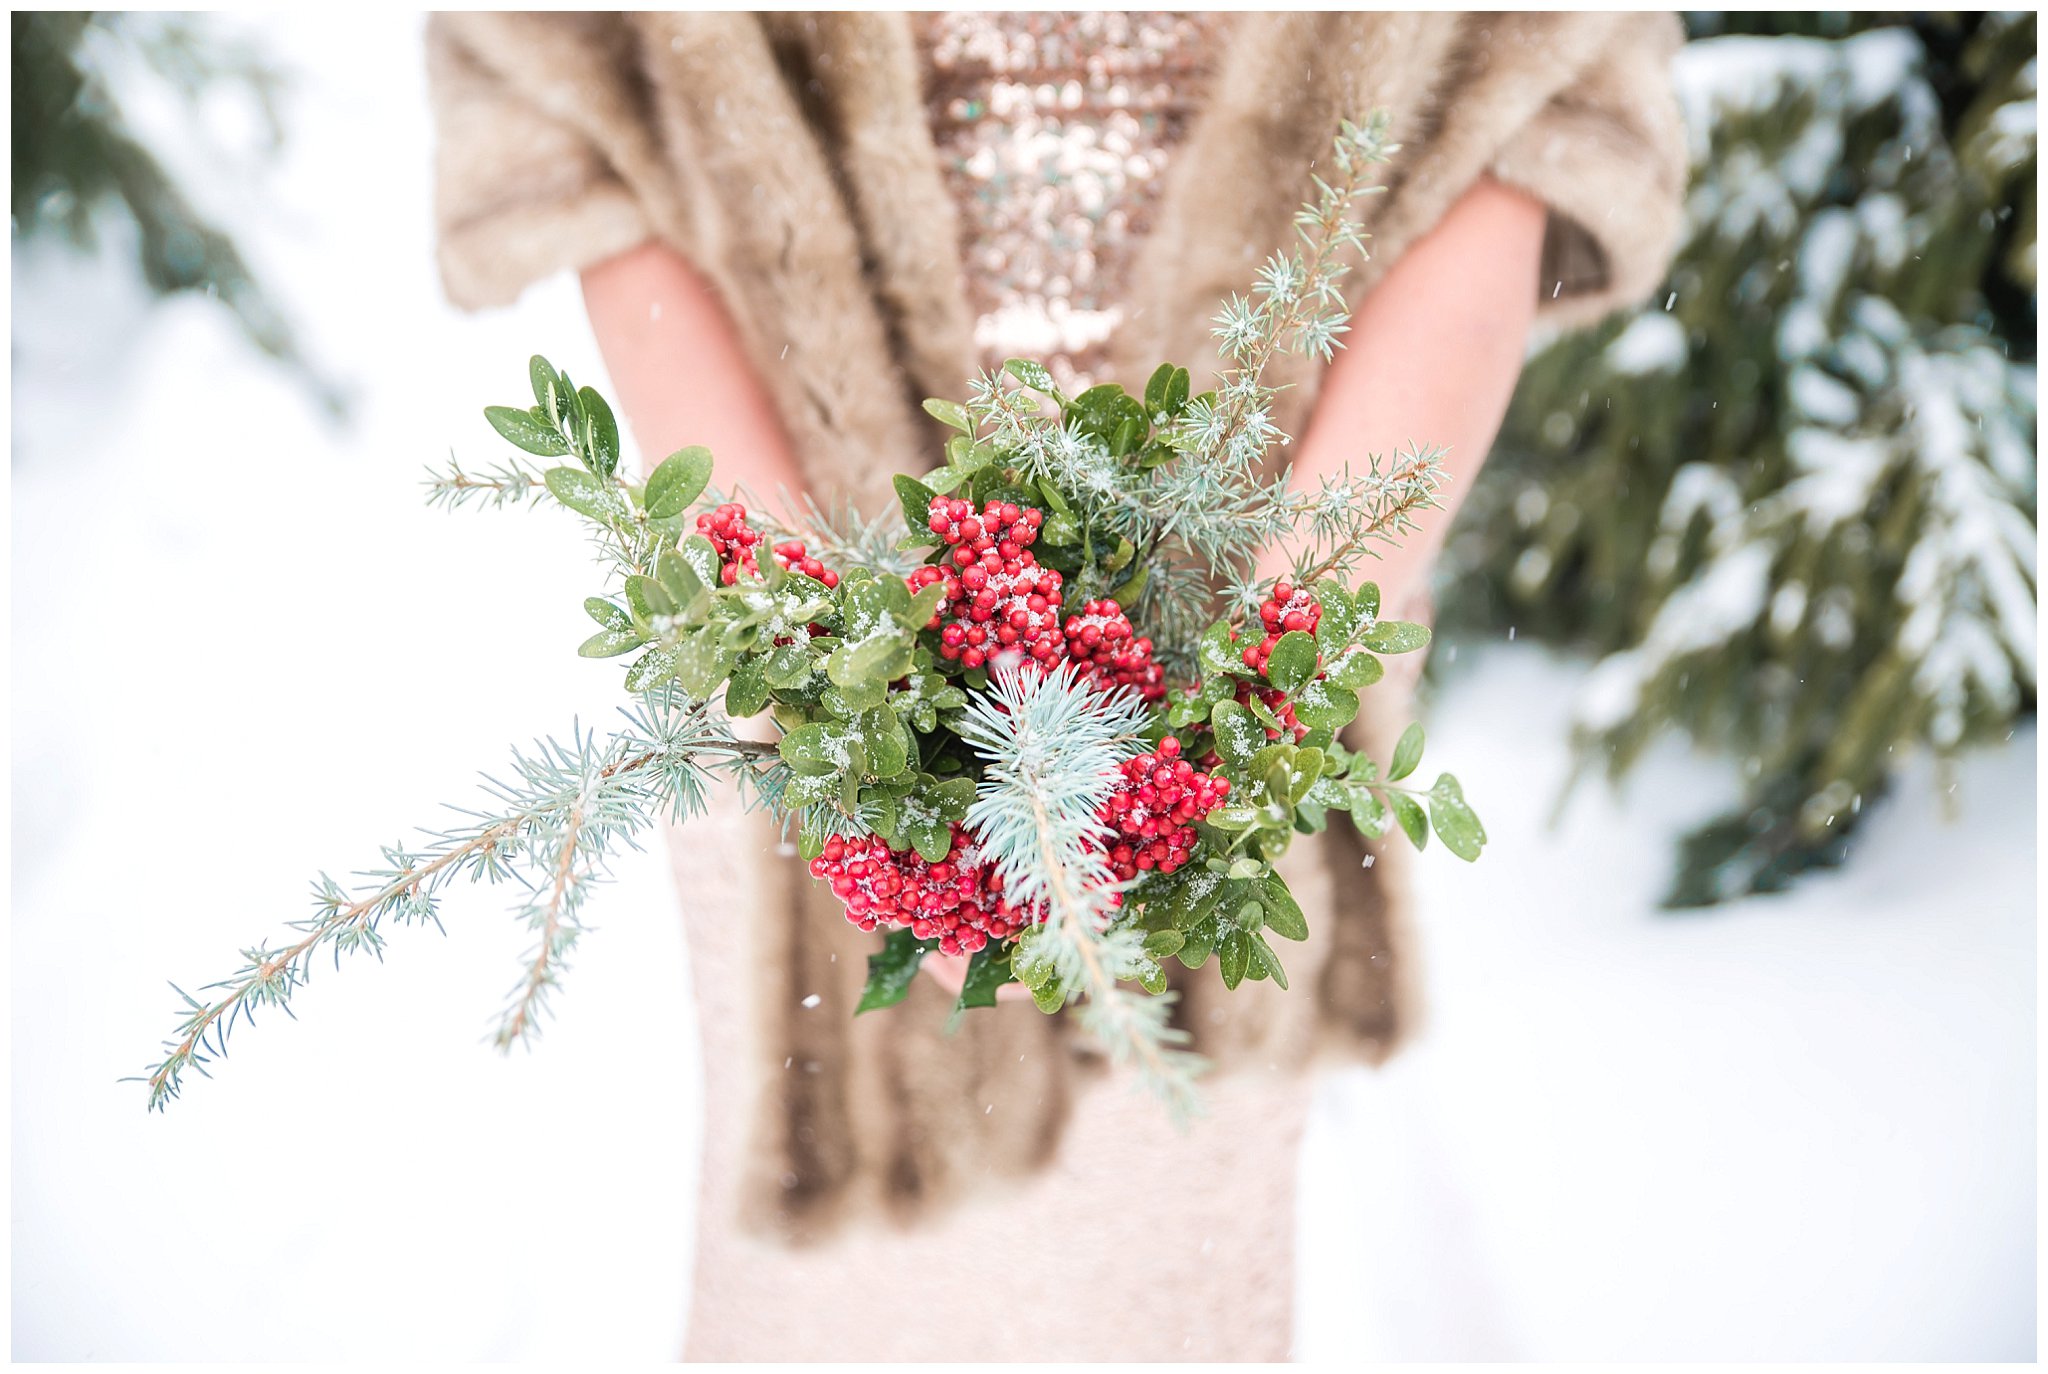 Tips for a Winter Engagement Session - Laura Lee Photography